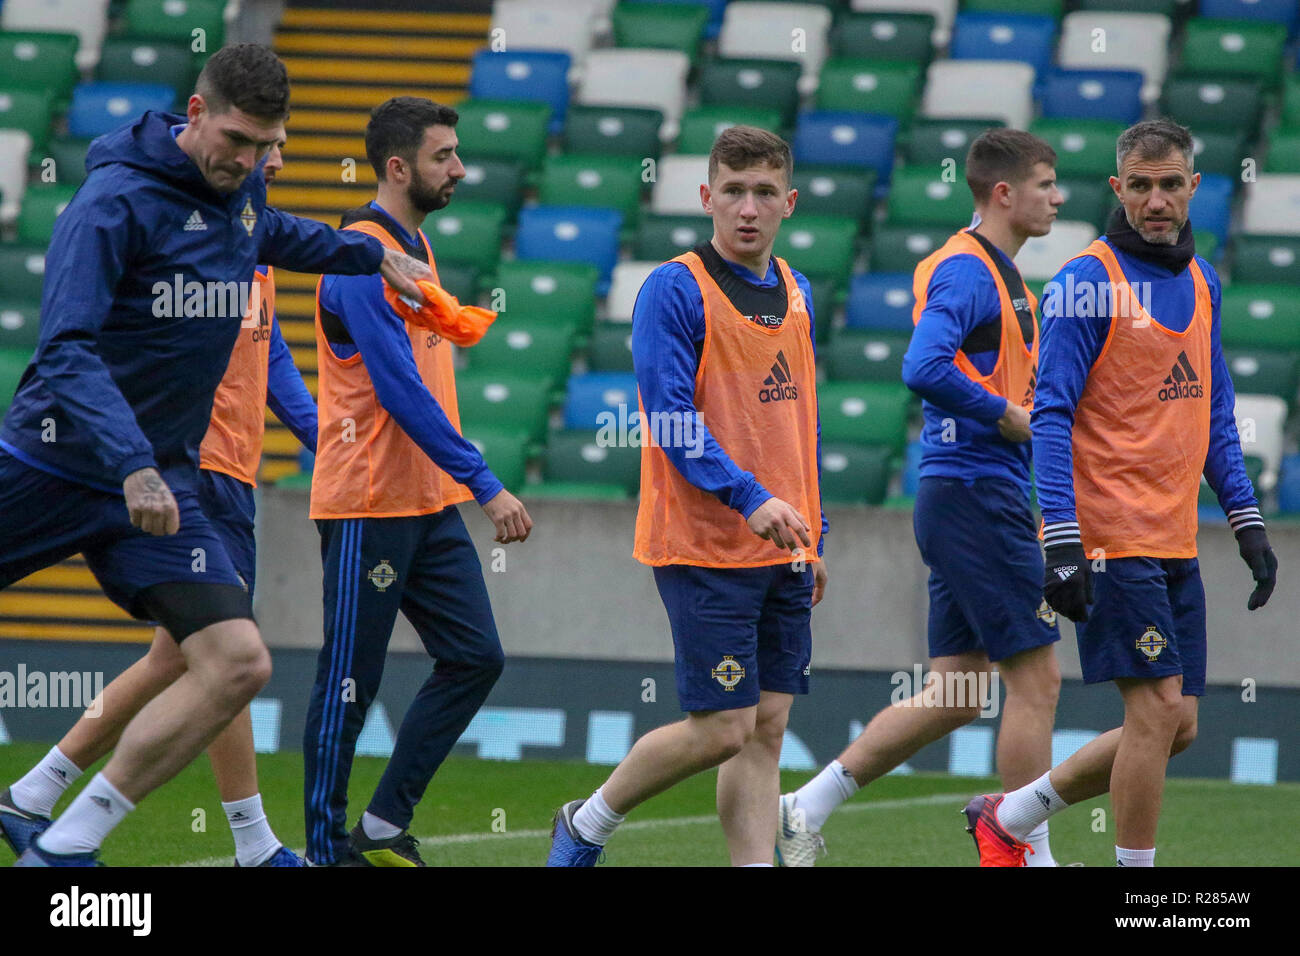 Windsor Park, Belfast, Northern Ireland.17 November 2018. Northern Ireland training in Belfast this morning ahead of their UEFA Nations League game against Austria tomorrow night in the stadium. Bobby Burns (centre). Credit: David Hunter/Alamy Live News. Stock Photo